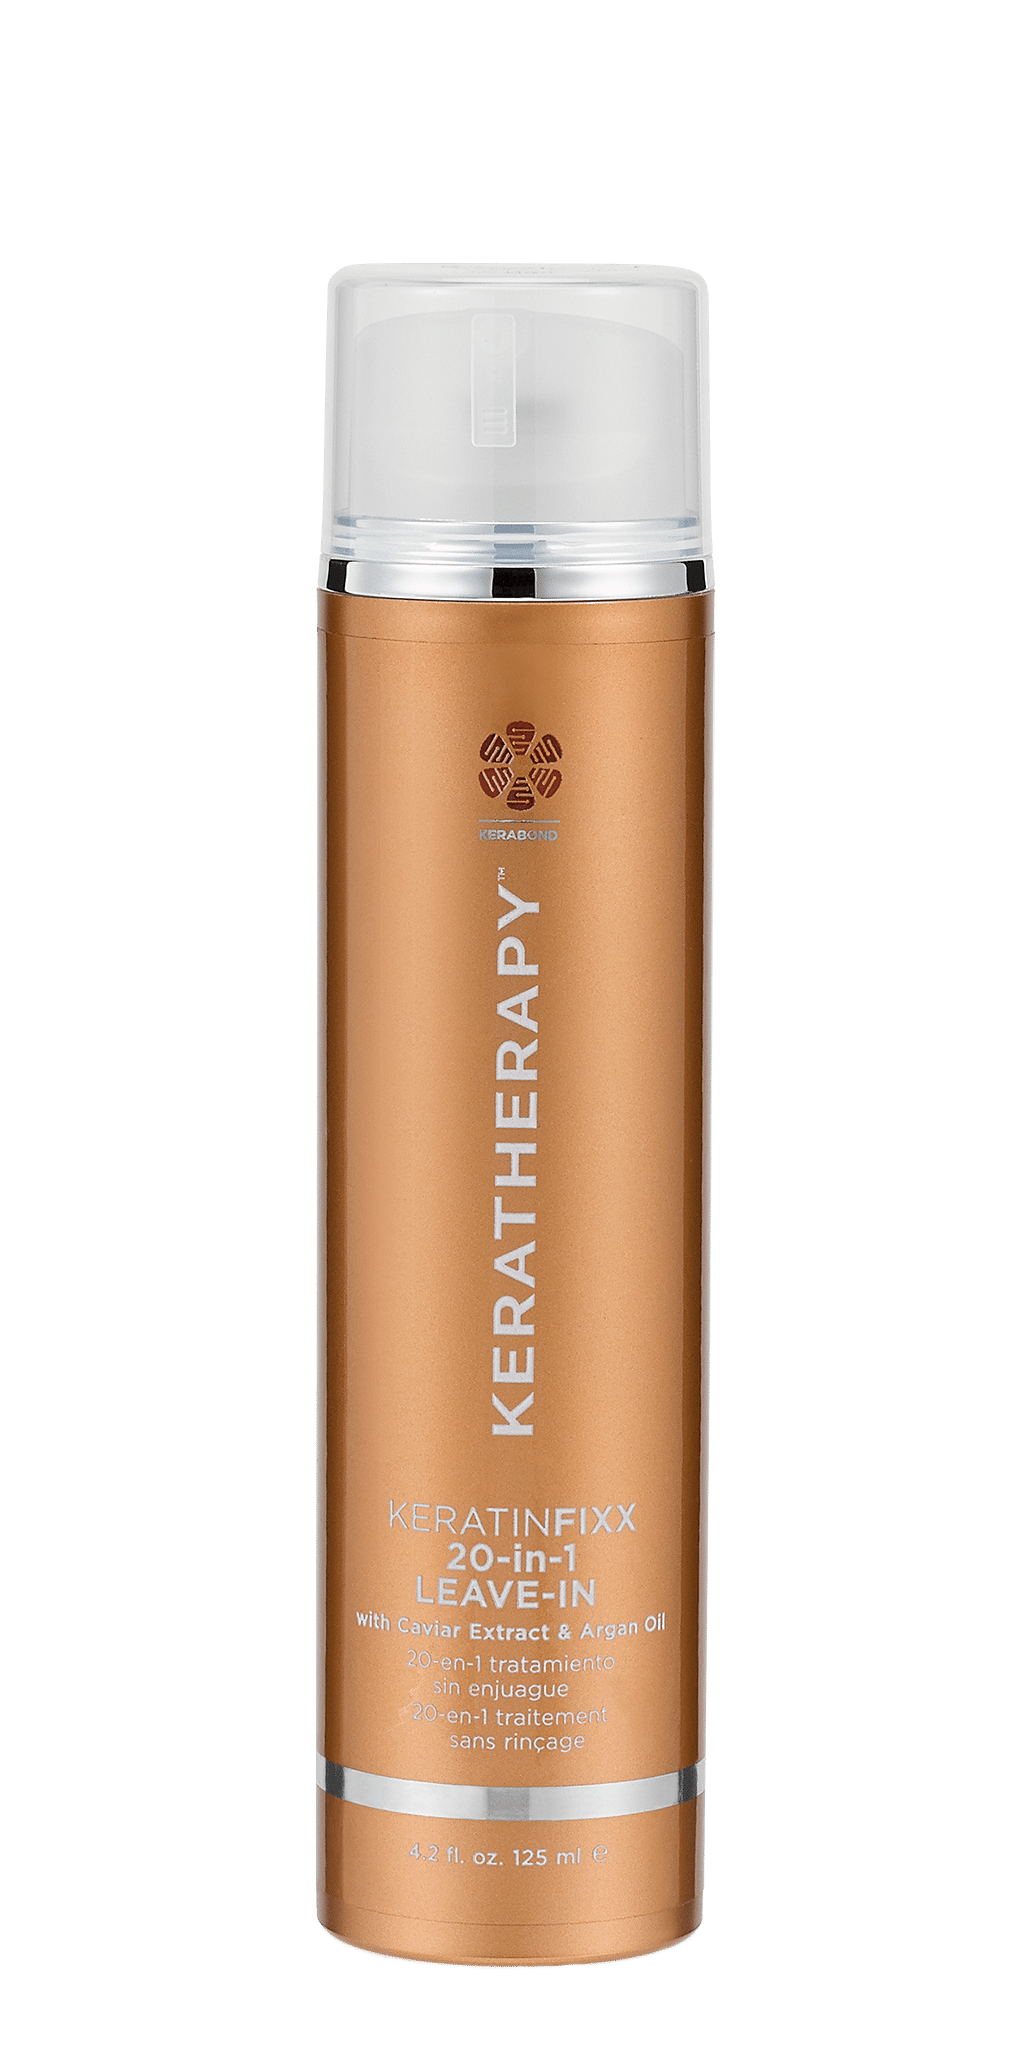 Keratherapy KeratinFIXX 20-in-1 Miracle Leave-In 125ml